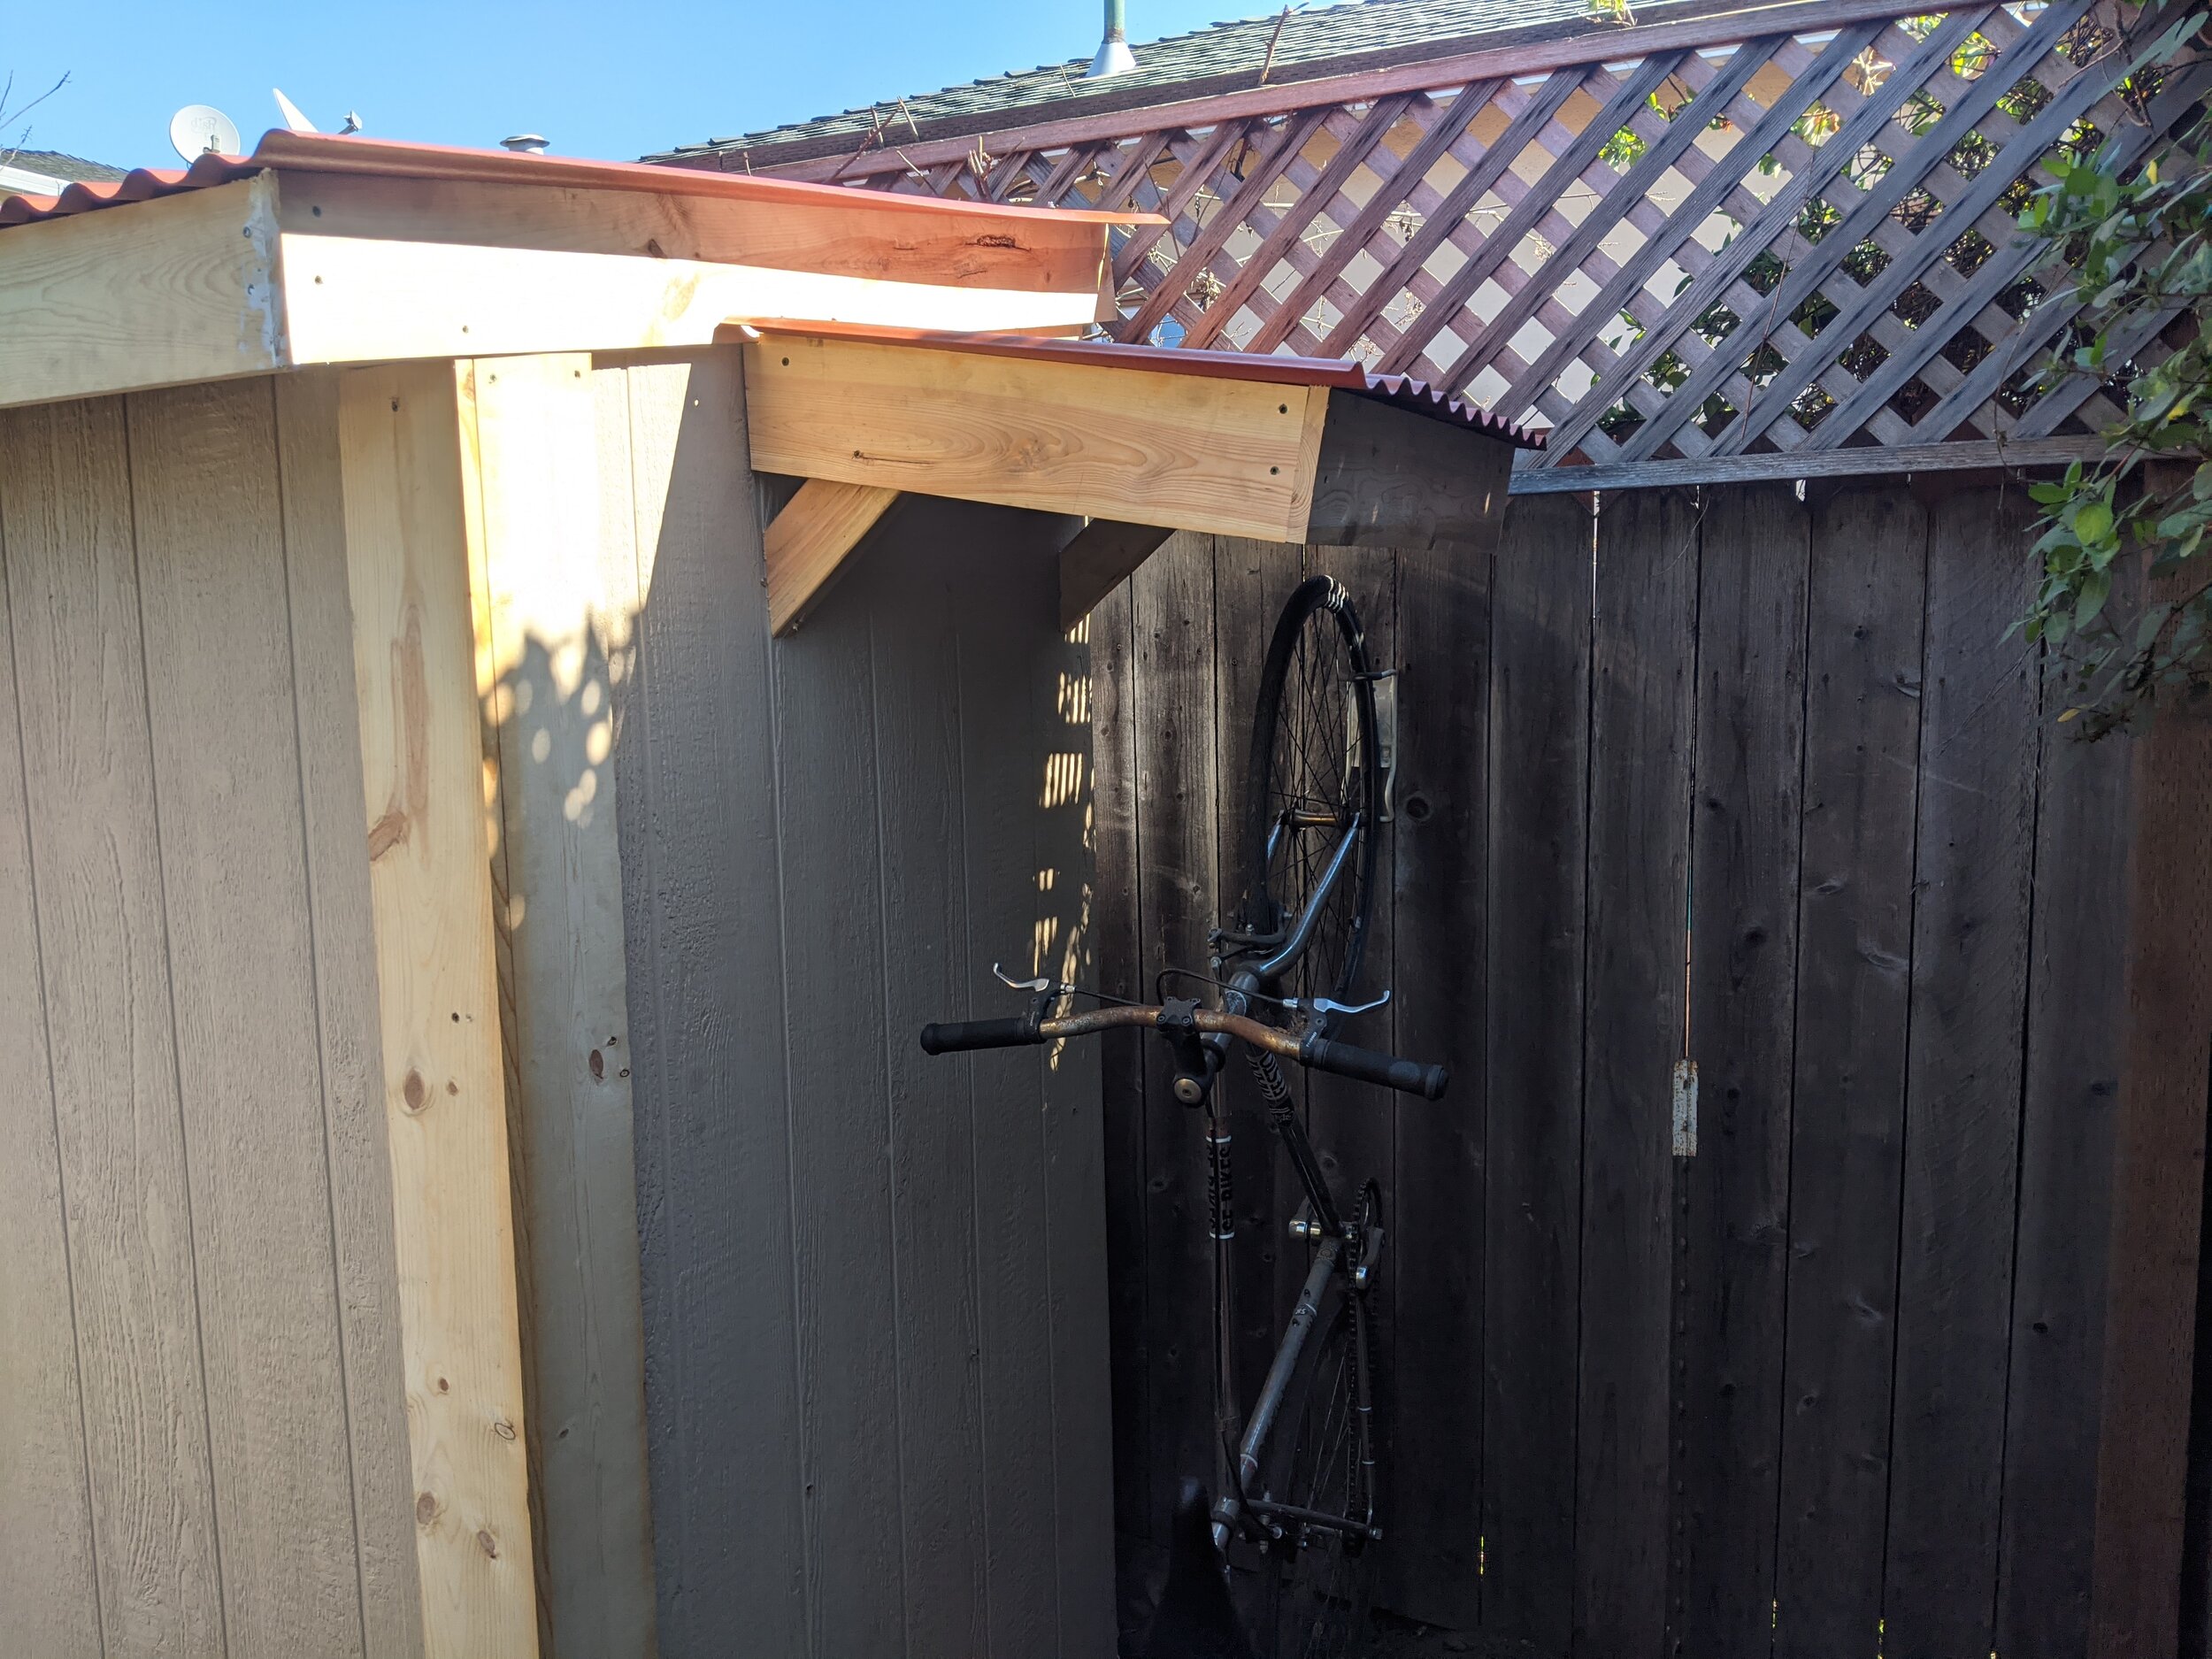  Once the rest of the shed was complete, I built a small roof out of scrap to protect my wife’s bike from the rain. 